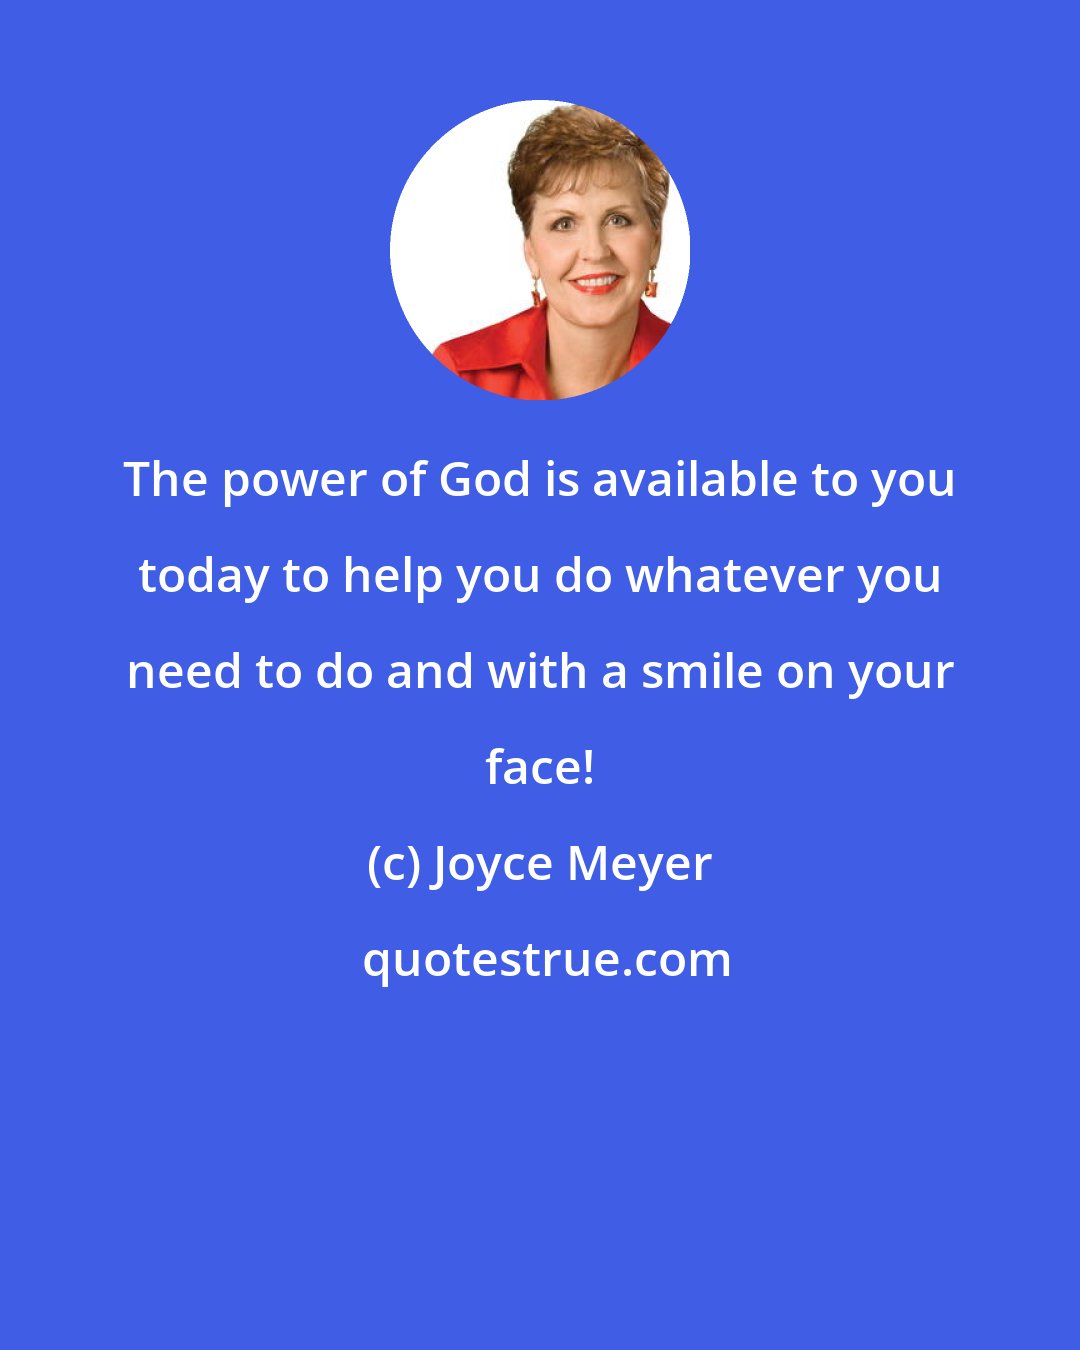 Joyce Meyer: The power of God is available to you today to help you do whatever you need to do and with a smile on your face!